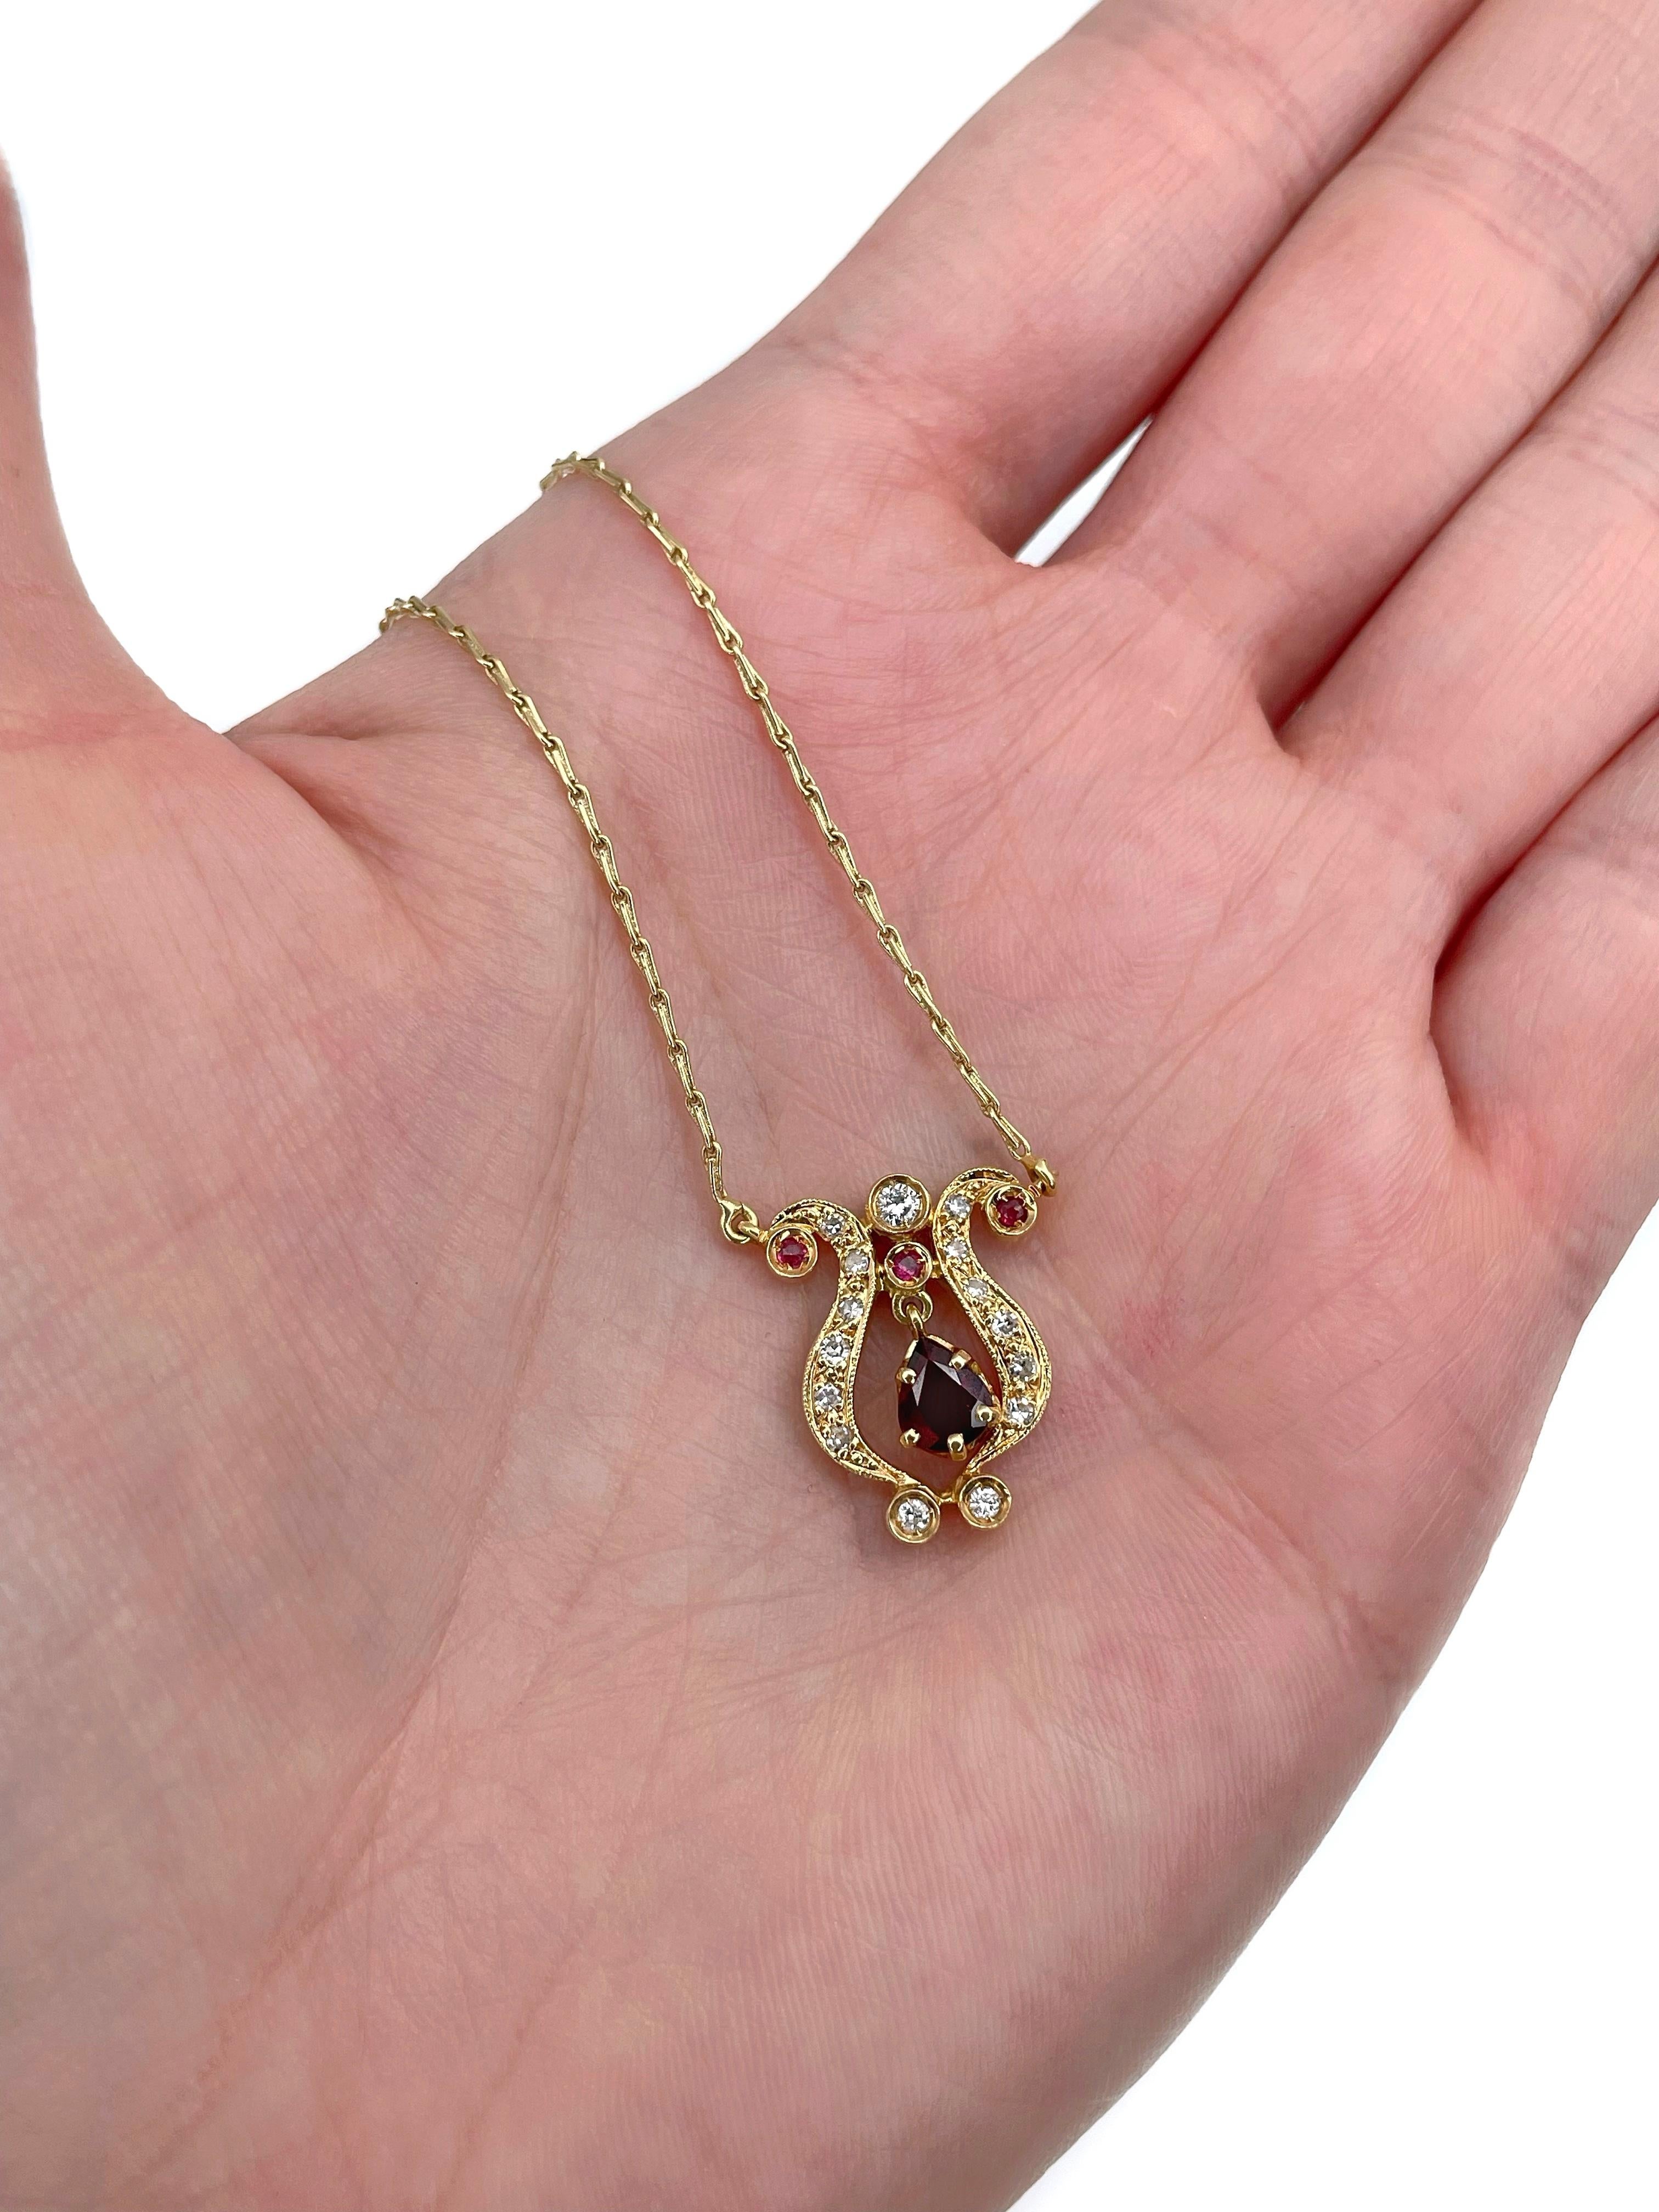 This is a vintage pendant chain necklace crafted in 18K yellow gold. Circa 1960. 

 The piece features:
- 1 garnet, pear cut
- 3 rubies, round cut, TW 0.10ct, slpR 5/4, SI
- 12 diamonds, RBC -17/57, TW 0.24ct, RW-W, VS-SI

Weight: 5.55g
Pendant